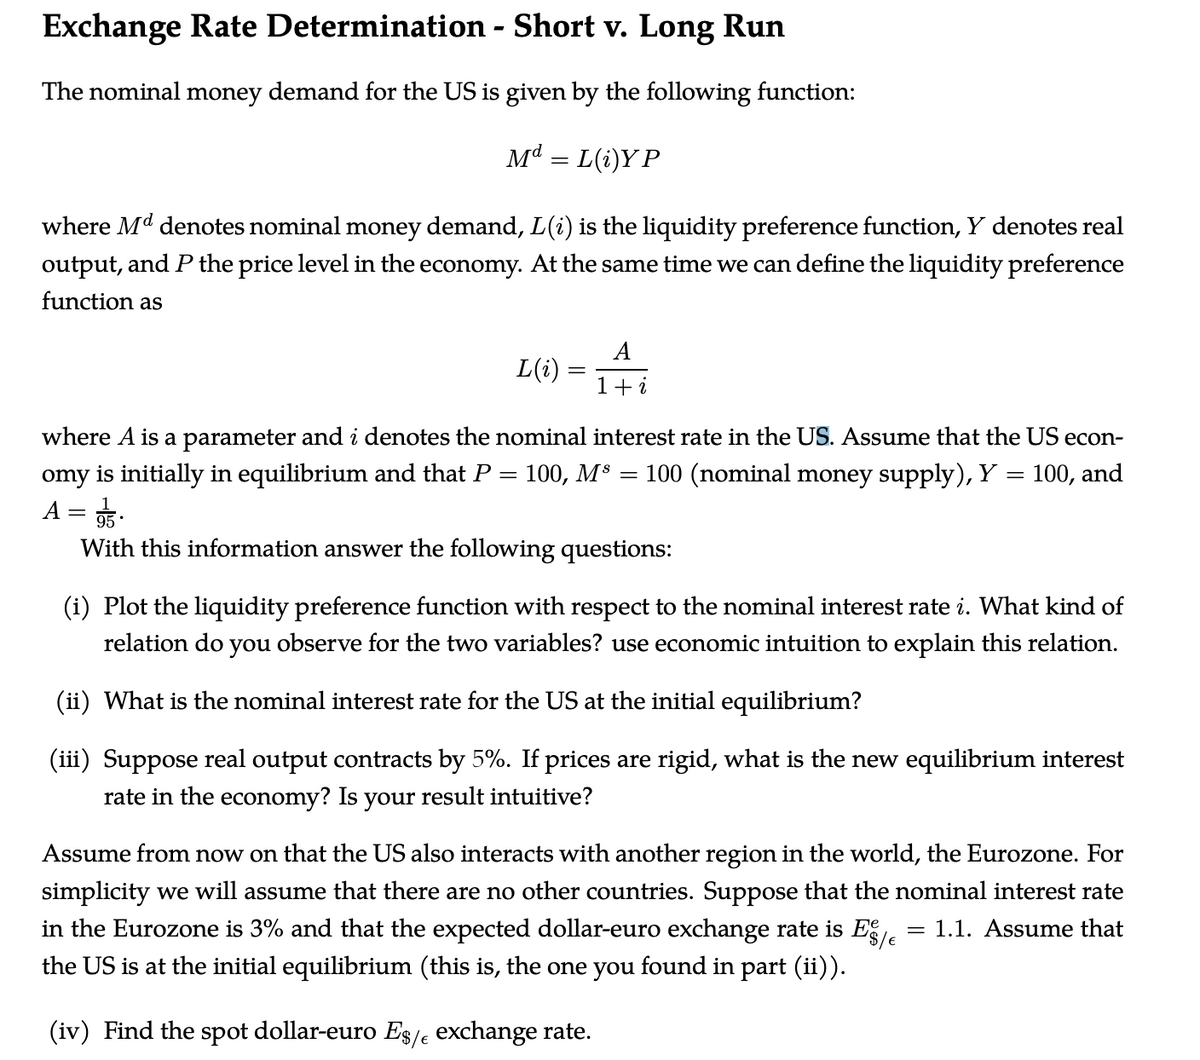 Exchange Rate Determination - Short v. Long Run
The nominal money demand for the US is given by the following function:
Md = L(i)Y P
where Md denotes nominal money demand, L(i) is the liquidity preference function, Y denotes real
output, and P the price level in the economy. At the same time we can define the liquidity preference
function as
A
L(i)
1+i
where A is a parameter and i denotes the nominal interest rate in the US. Assume that the US econ-
omy is initially in equilibrium and that P = 100, M³
A = .
With this information answer the following questions:
100 (nominal money supply), Y = 100, and
(i) Plot the liquidity preference function with respect to the nominal interest rate i. What kind of
relation do you observe for the two variables? use economic intuition to explain this relation.
(ii) What is the nominal interest rate for the US at the initial equilibrium?
(iii) Suppose real output contracts by 5%. If prices are rigid, what is the new equilibrium interest
rate in the economy? Is your result intuitive?
Assume from now on that the US also interacts with another region in the world, the Eurozone. For
simplicity we will assume that there are no other countries. Suppose that the nominal interest rate
in the Eurozone is 3% and that the expected dollar-euro exchange rate is E
the US is at the initial equilibrium (this is, the one you found in part (ii)).
= 1.1. Assume that
(iv) Find the spot dollar-euro Eş/e exchange rate.
